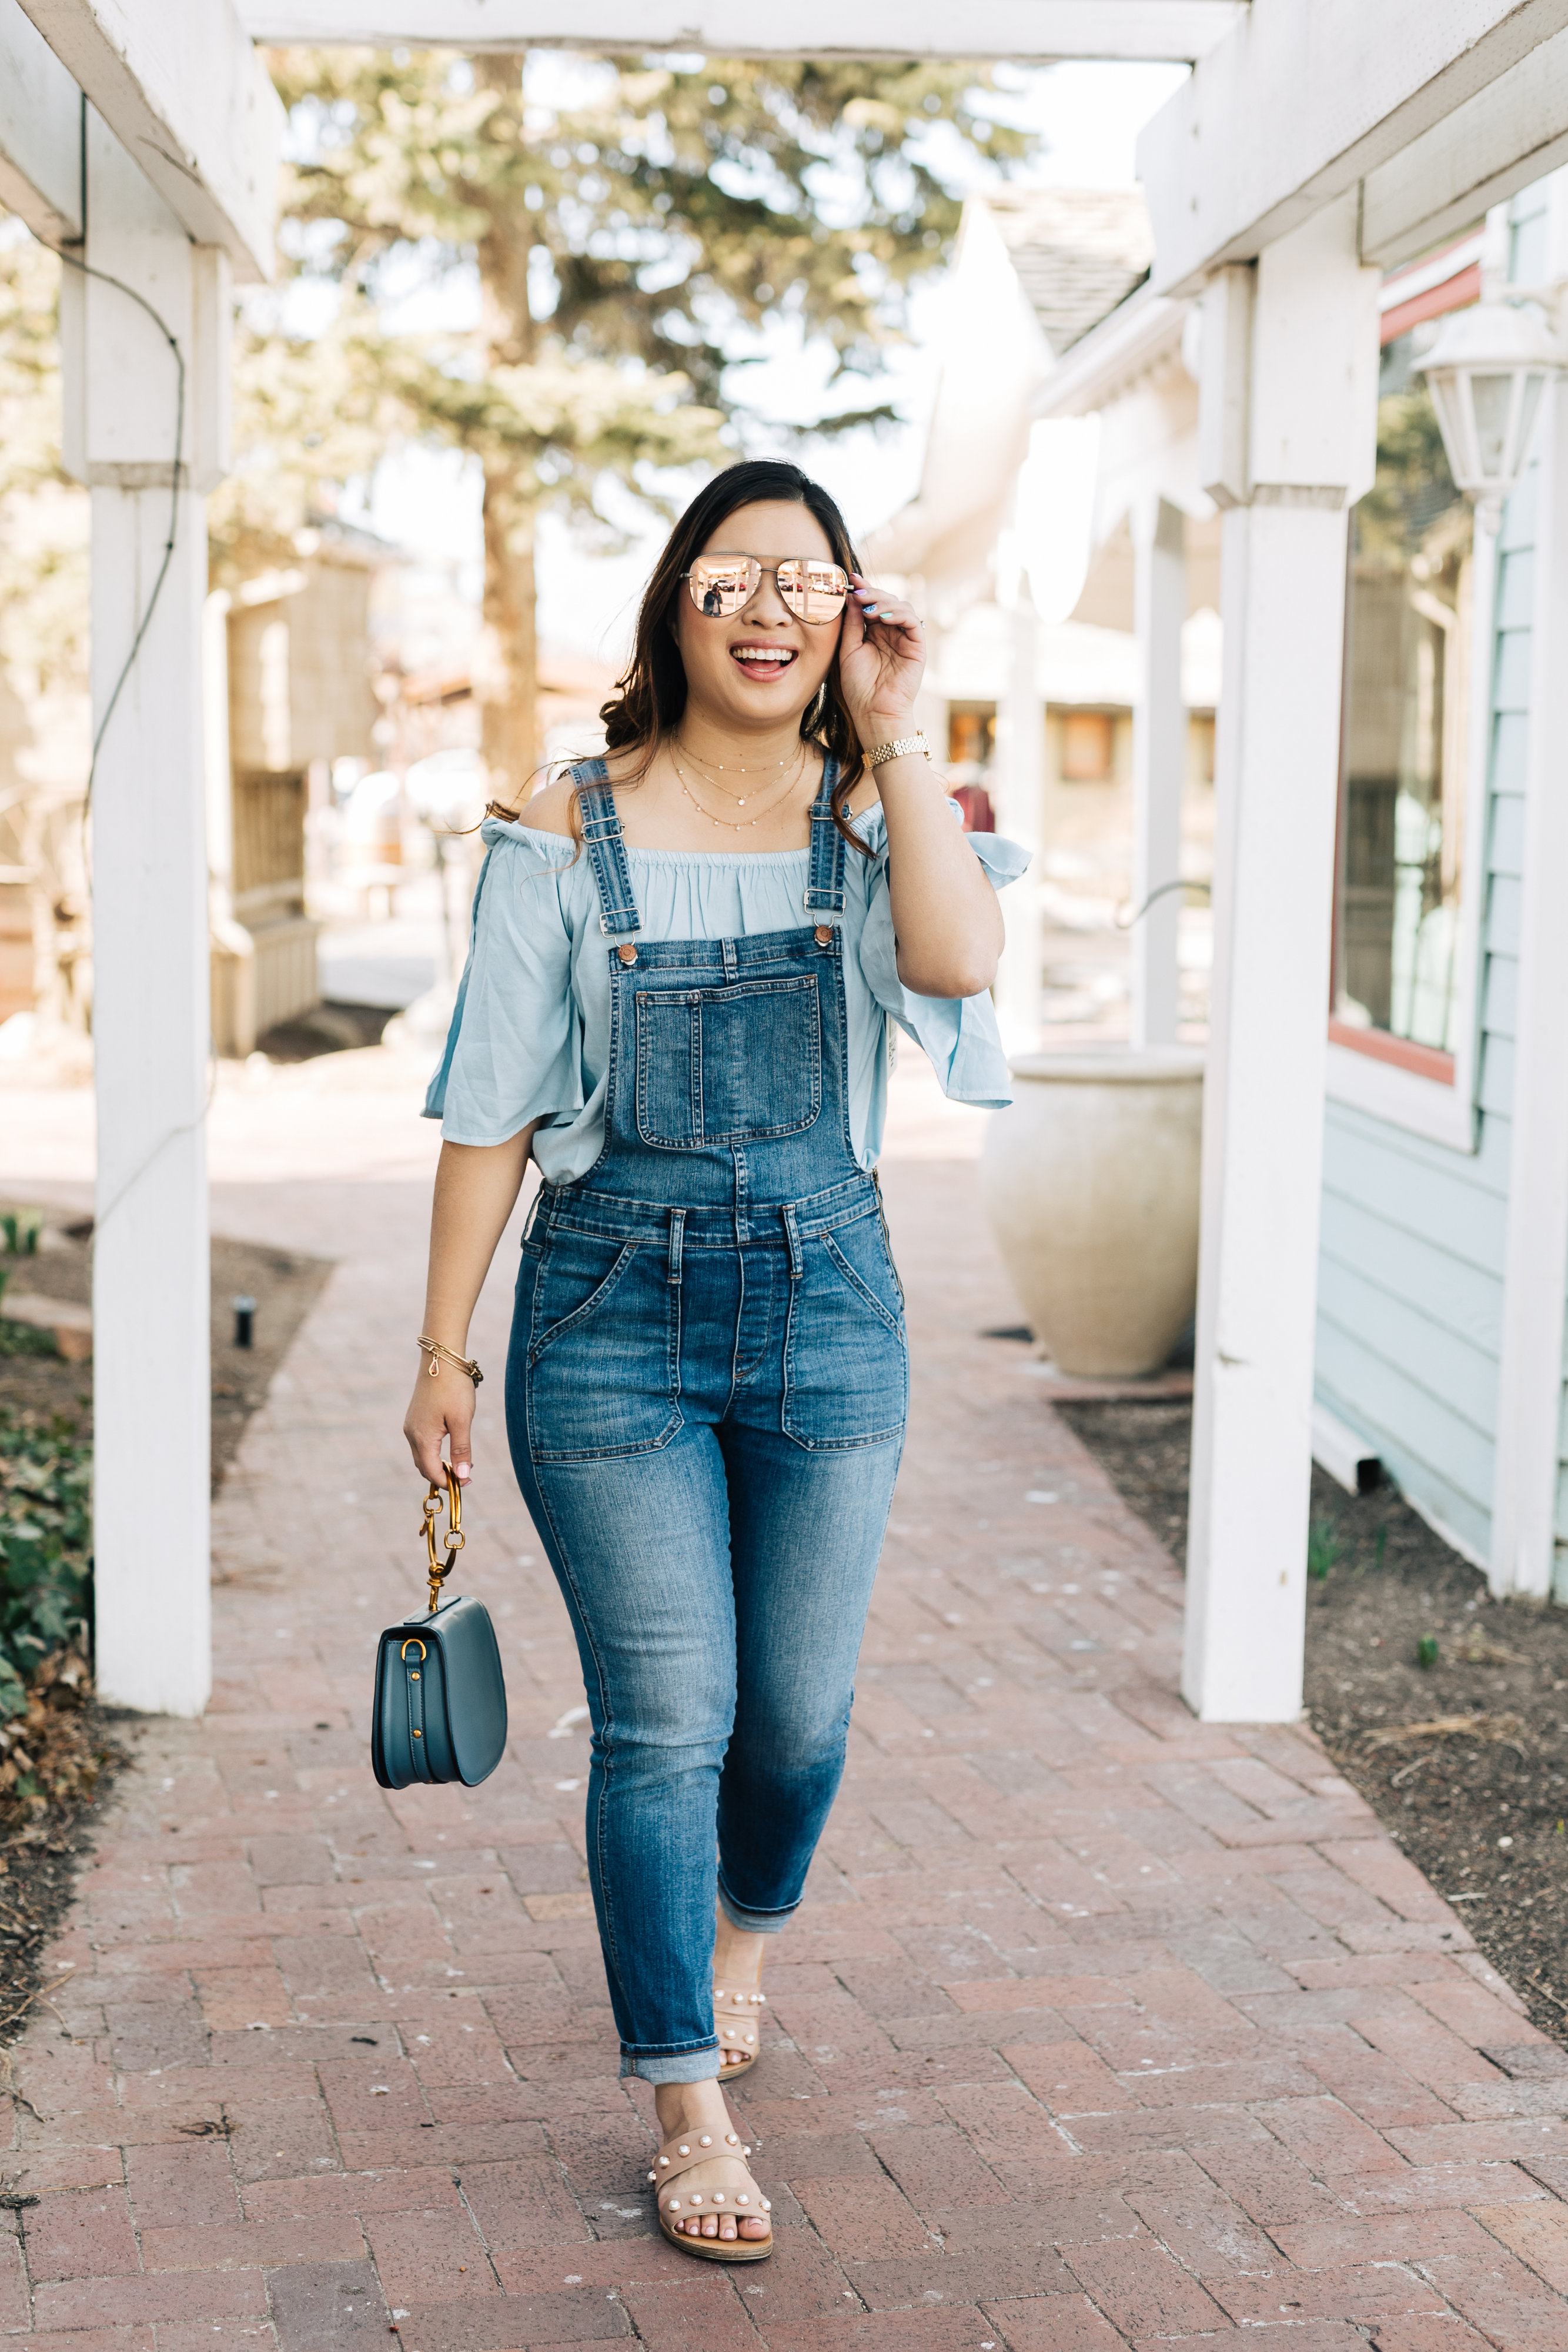 THE 4TH WAY TO WEAR DENIM OVERALLS - PRIIINCESSS